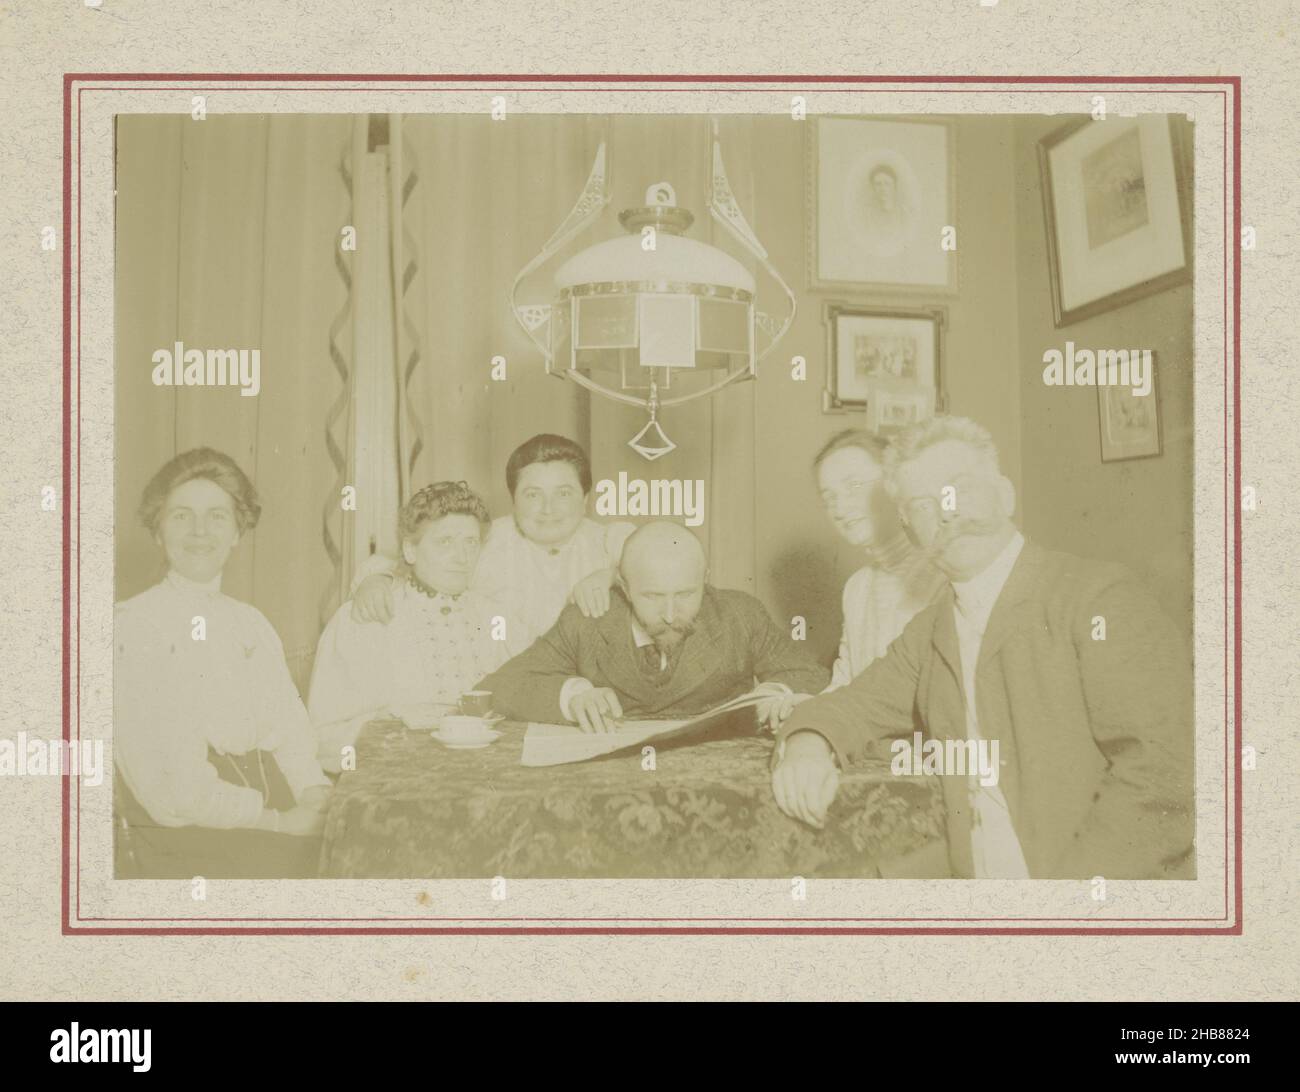 Group portrait around table in living room with photos on wall, Art-Nouveau lamp and man reading newspaper, anonymous, Netherlands, c. 1900 - c. 1910 Stock Photo